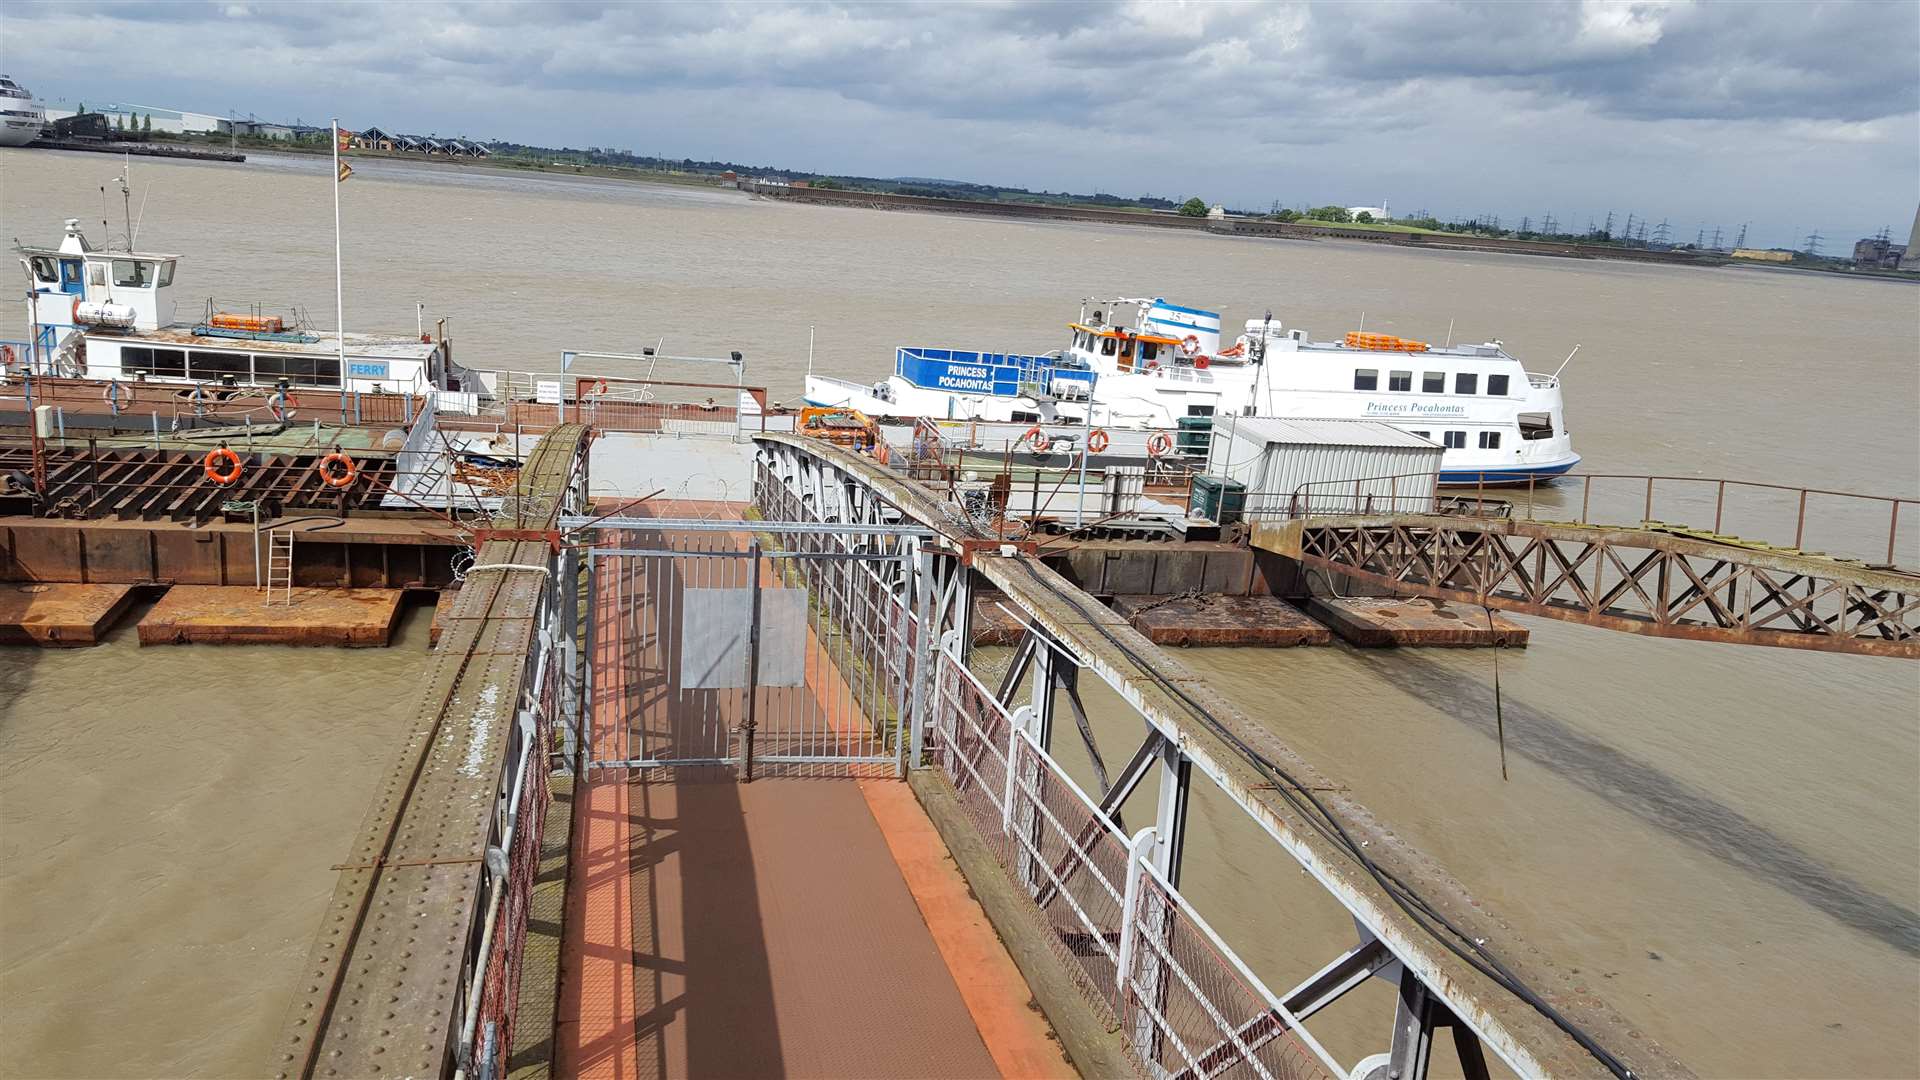 The ferry service was suspended in June 2017 because the pontoon leading to the boat from the pier was deemed unsafe and closed by Gravesham Borough Council